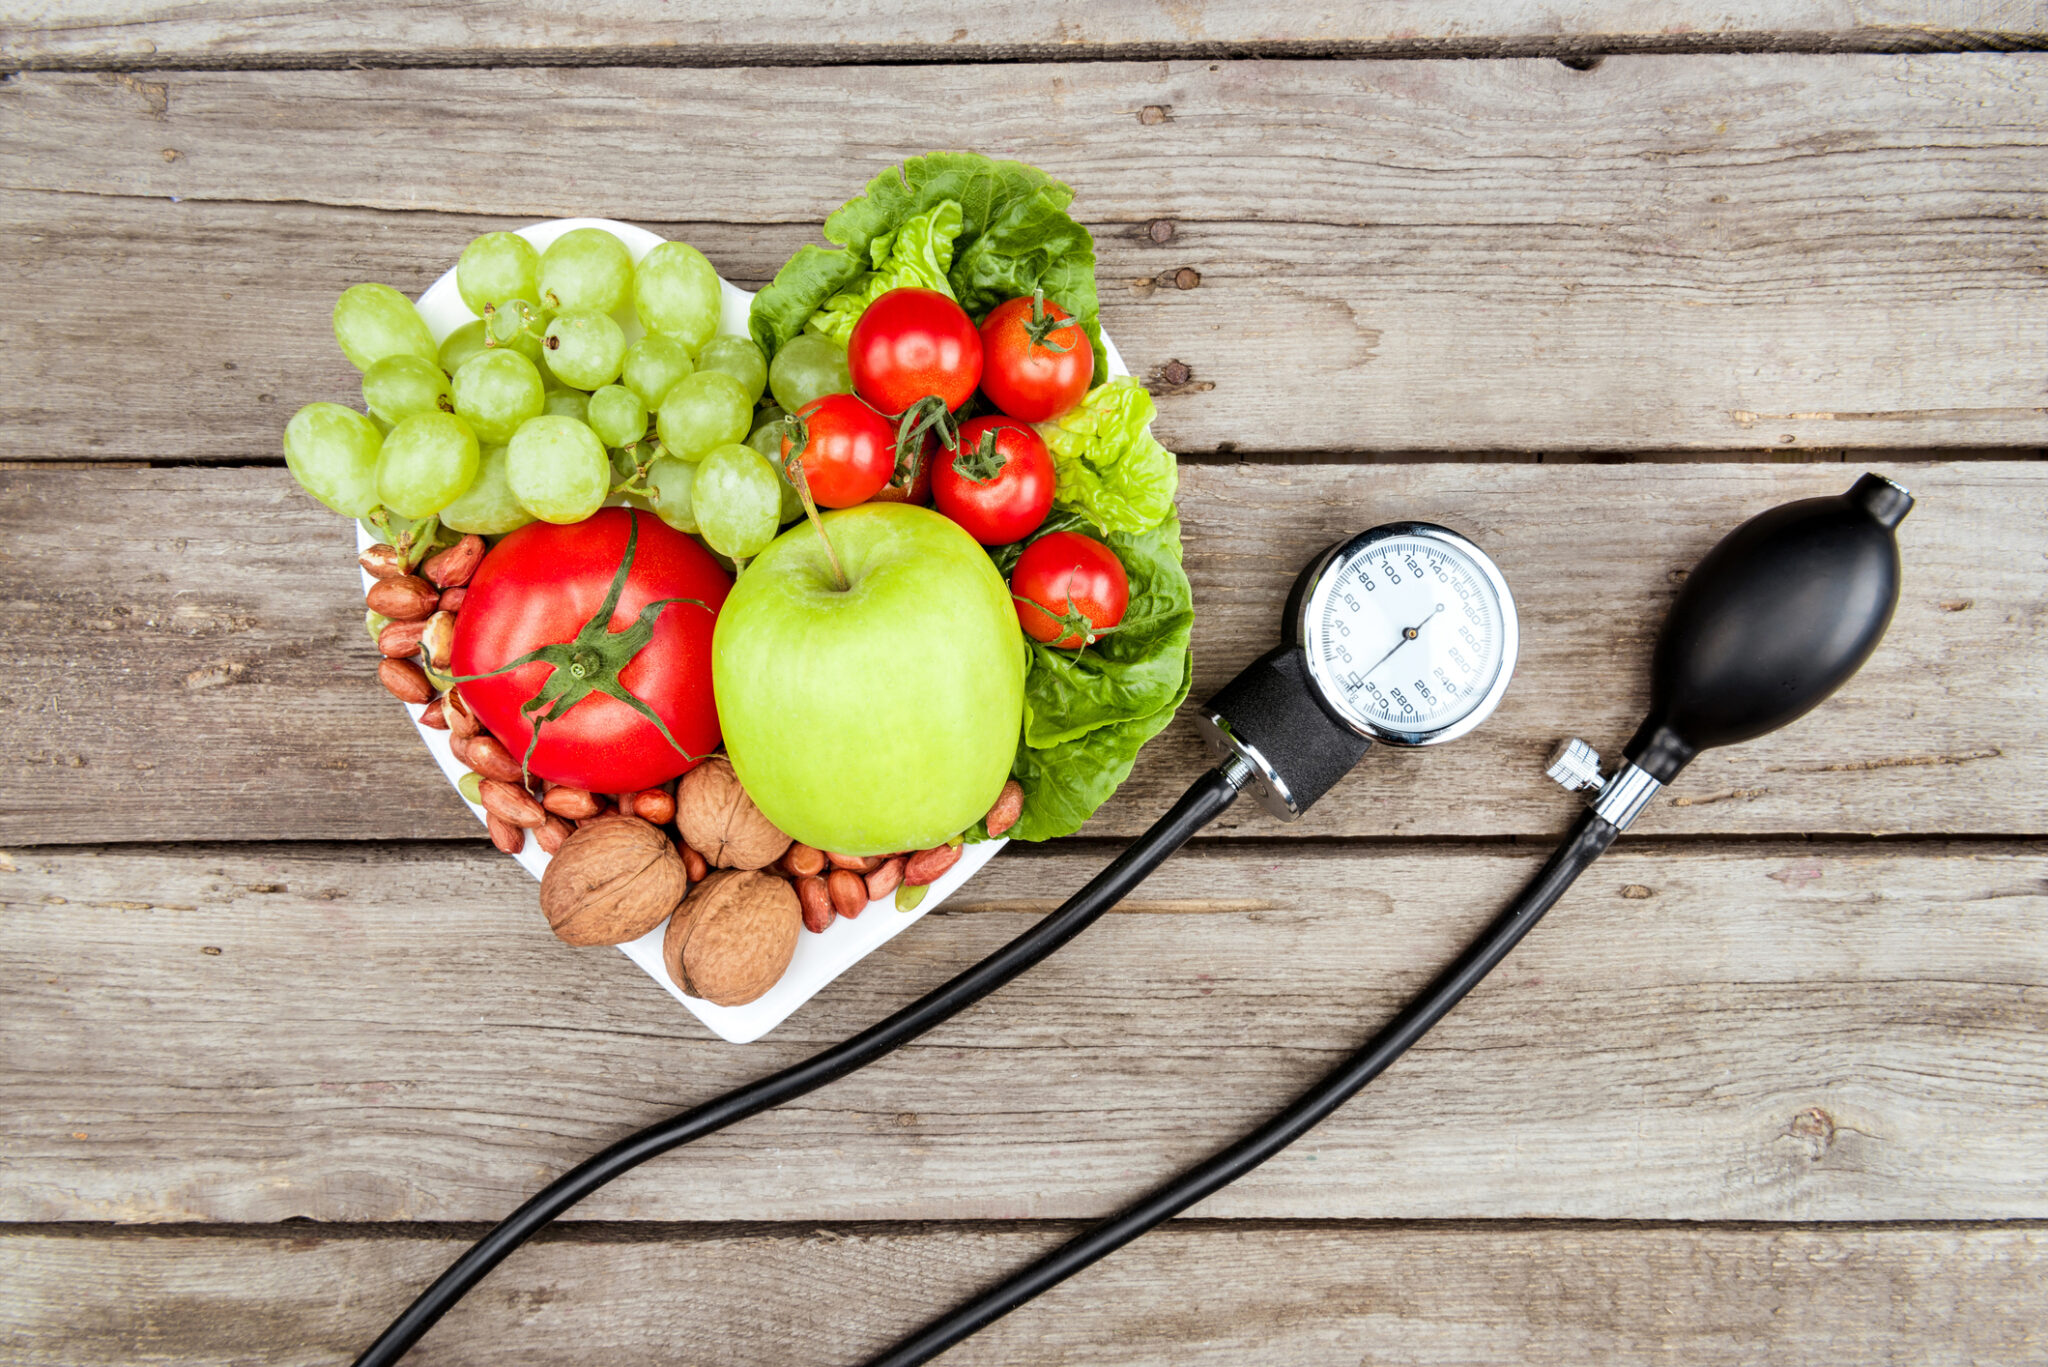 Having a healthy eating plan also helps control blood pressure